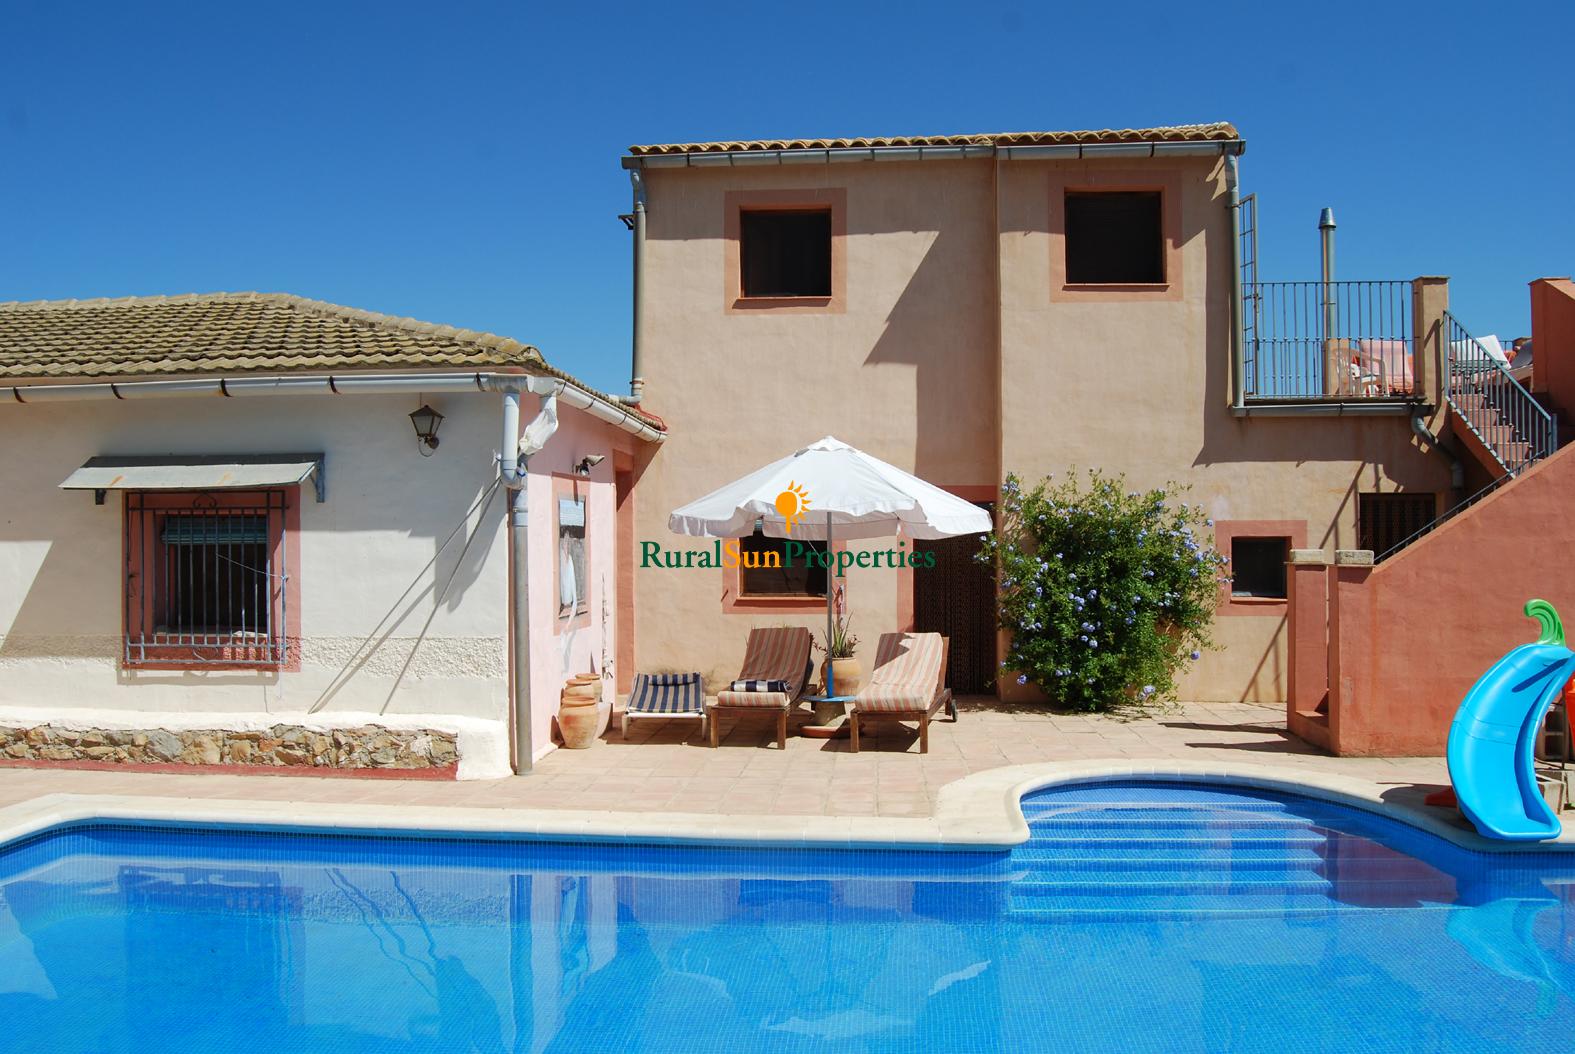 SOLD. Spacious and comfortable country house in Bullas